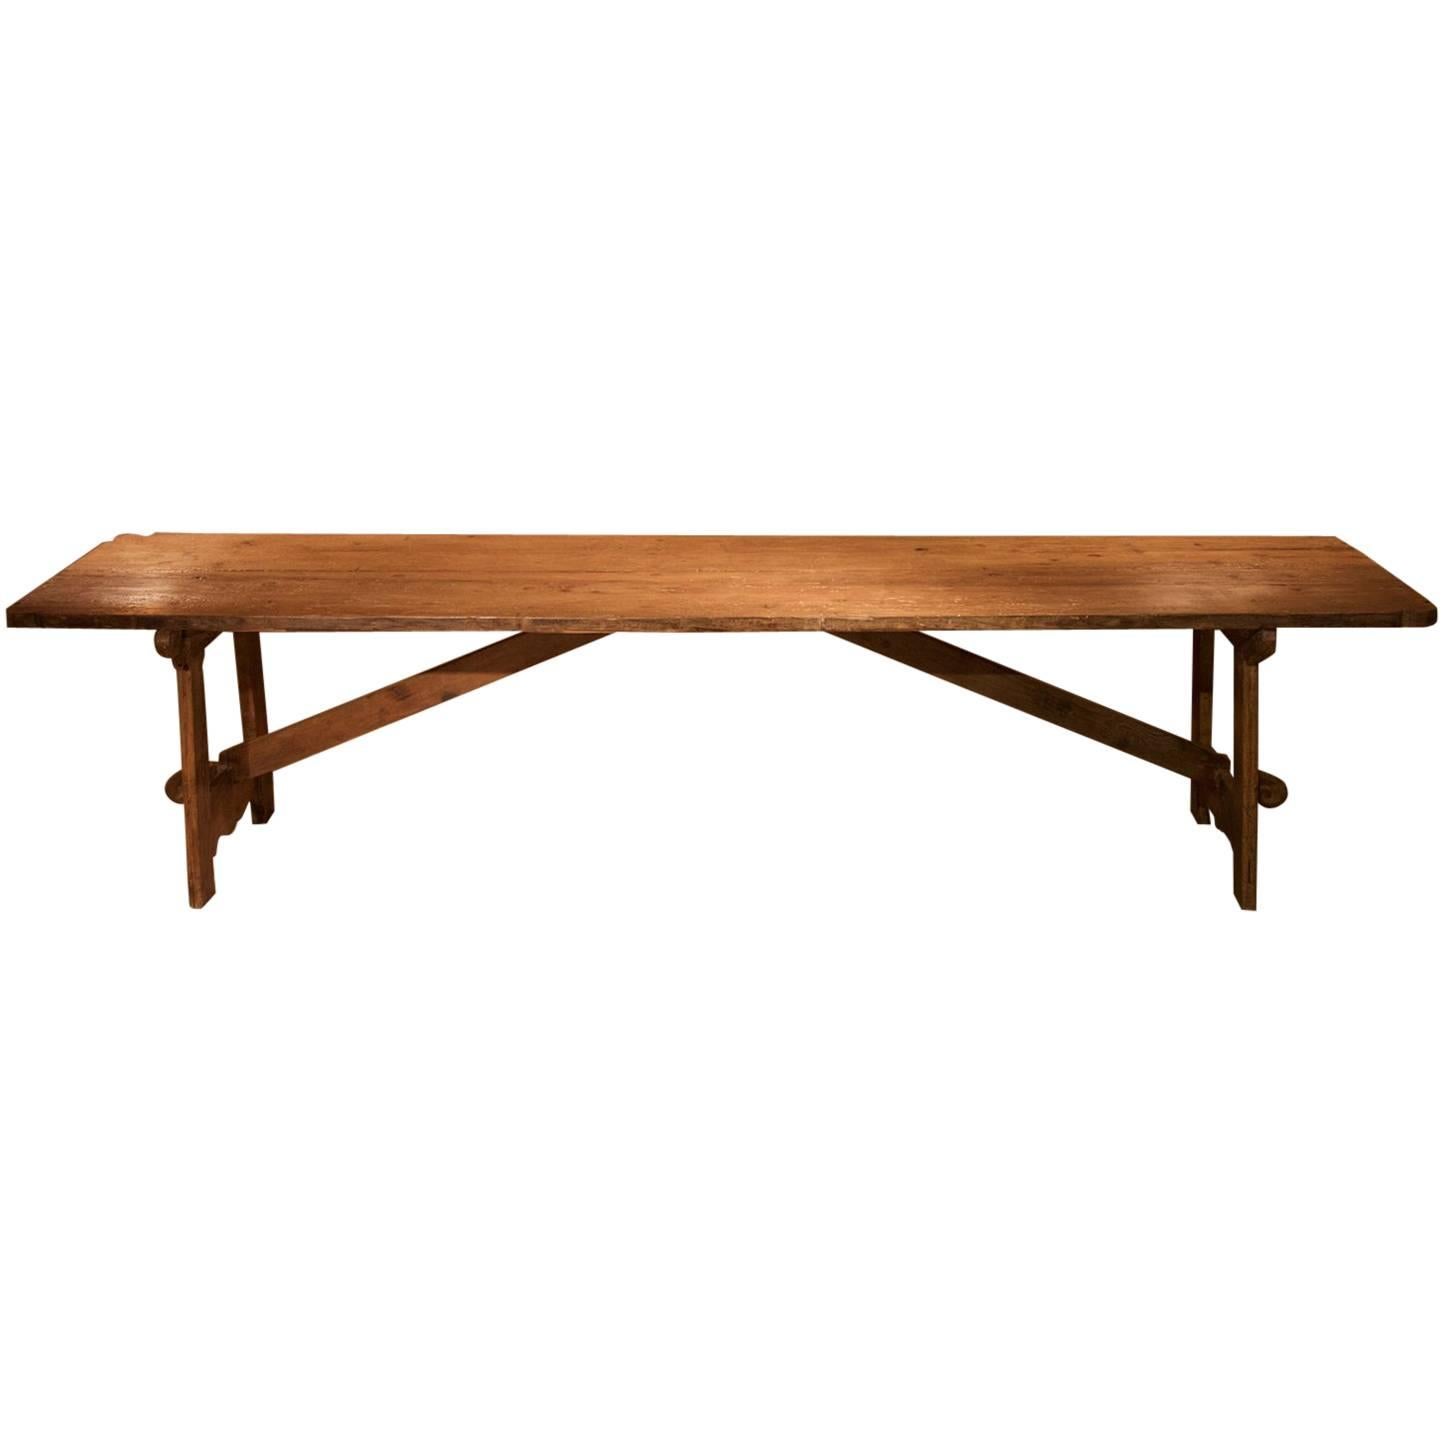 Solid Rustic Dining Room Table